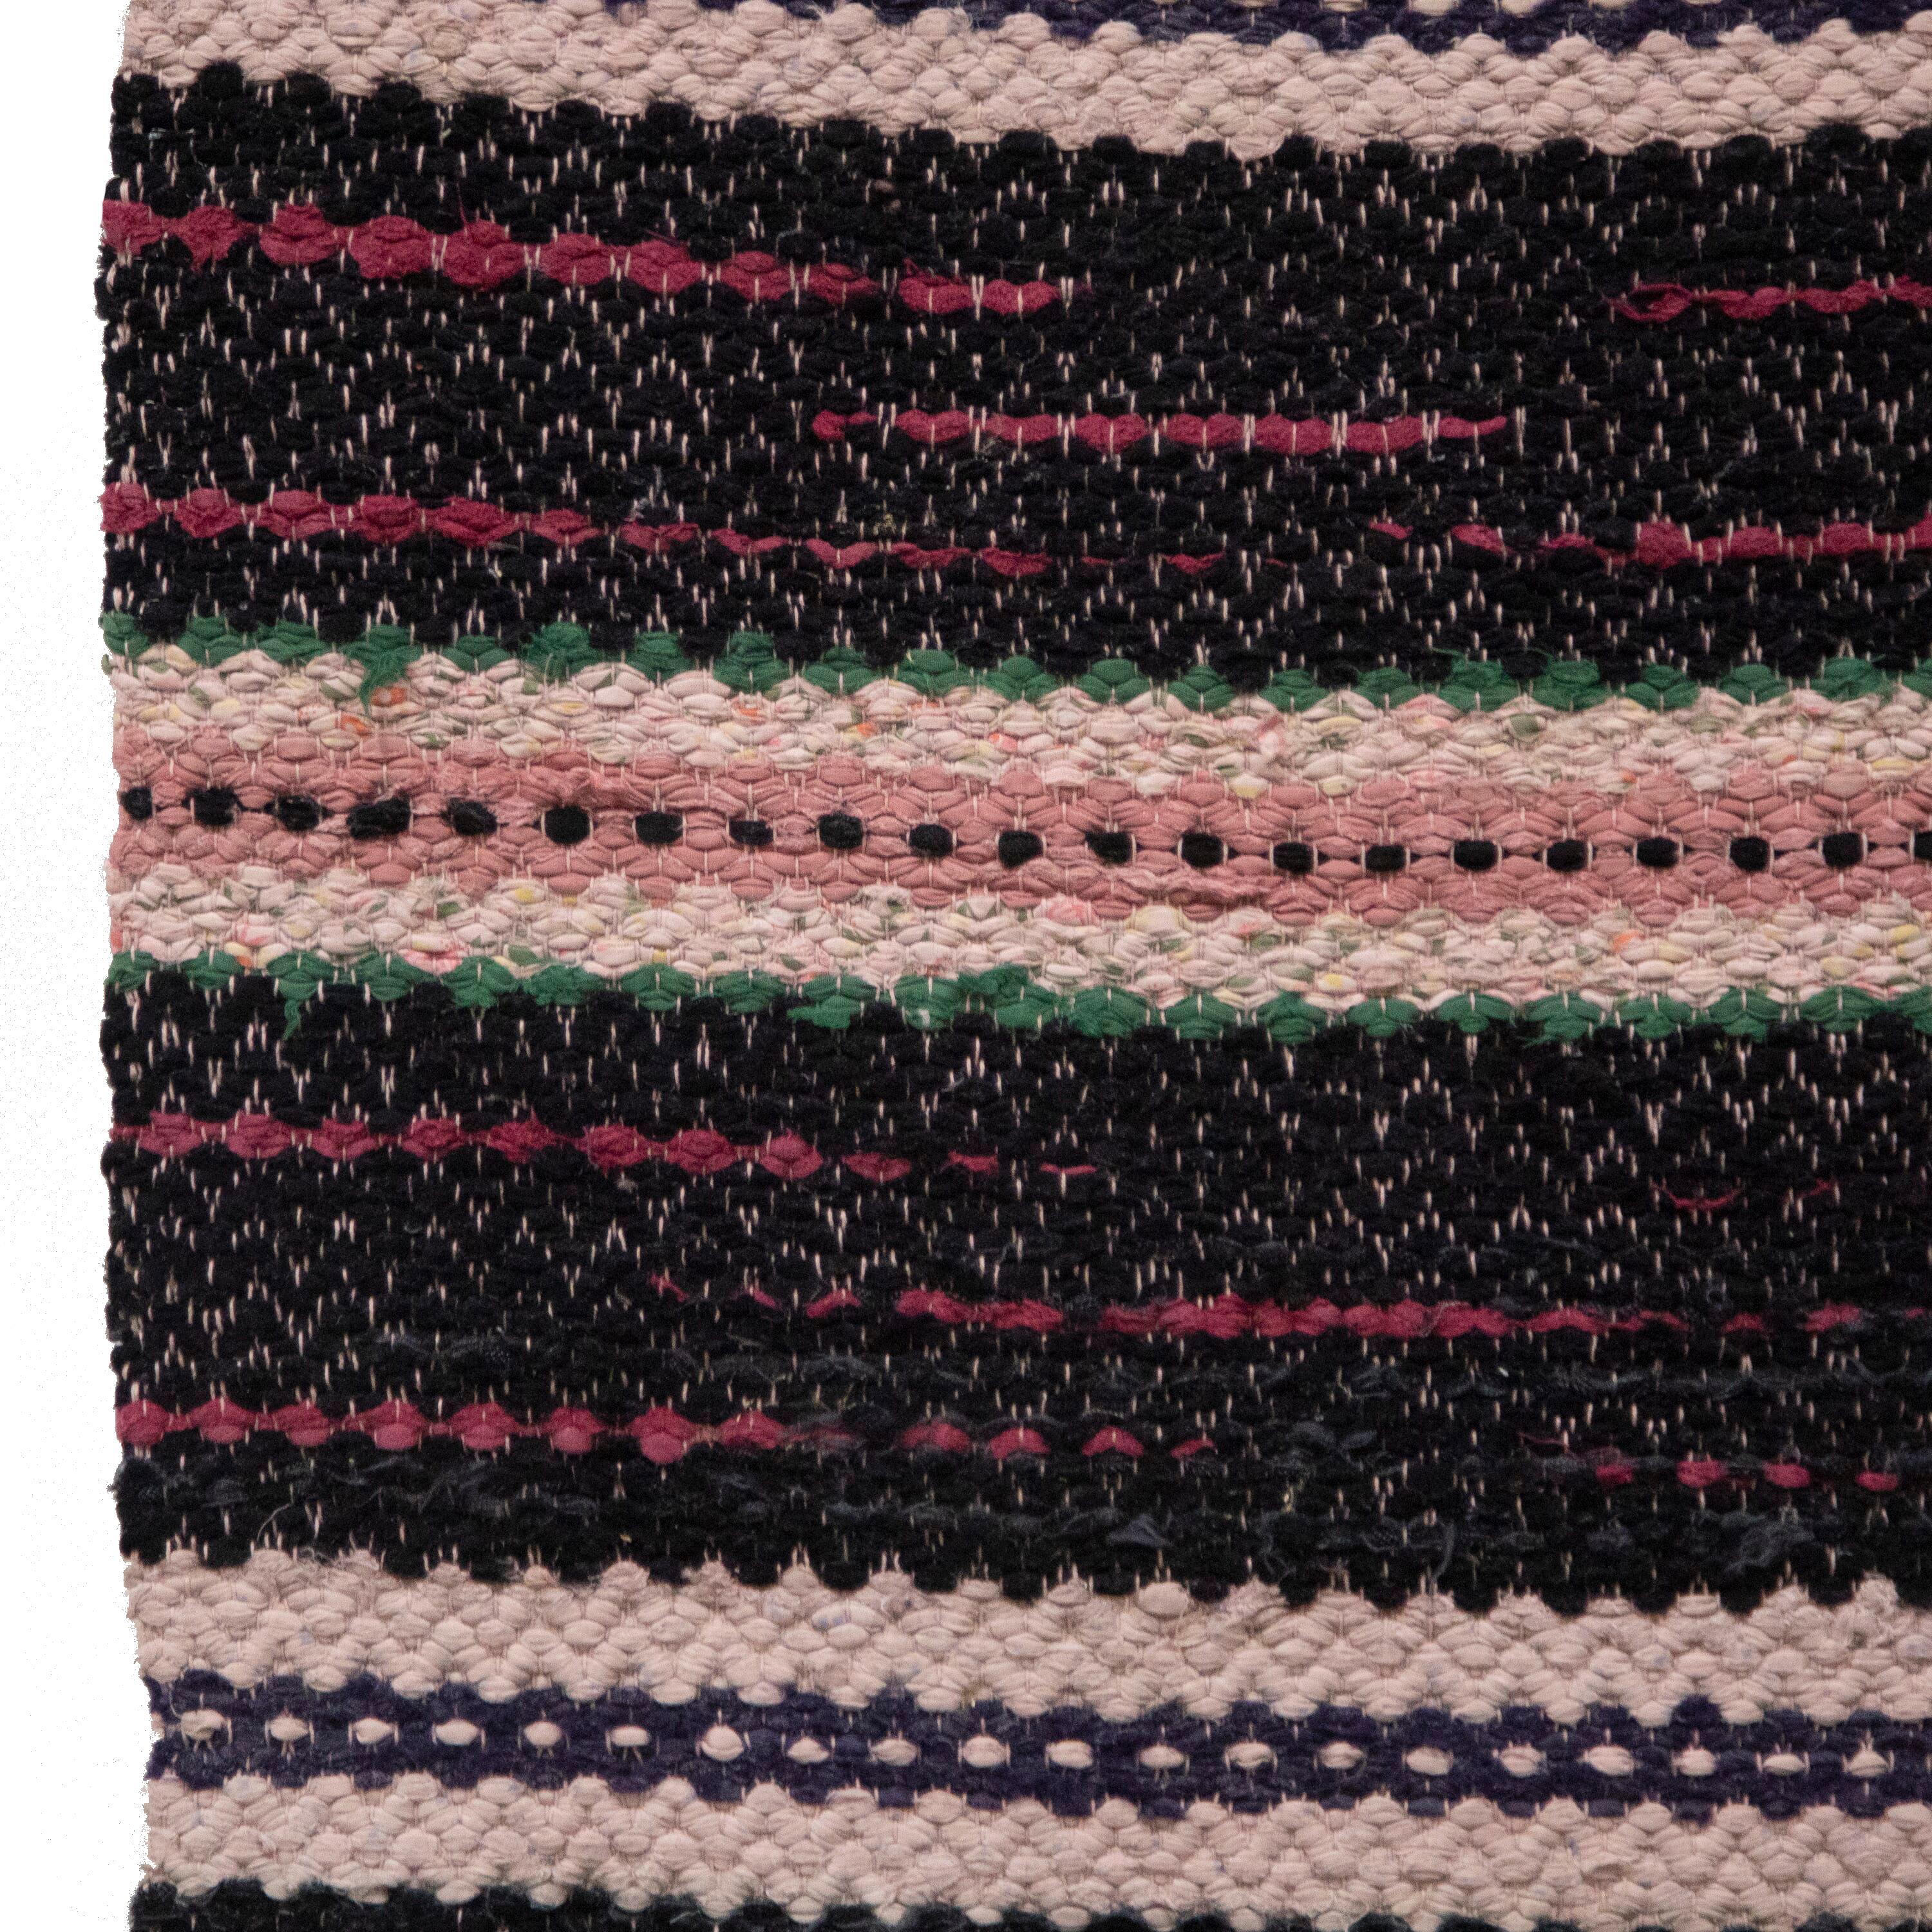 20th Century Swedish rag rug.   Featuring a stripe design in tones of black and pale pink.   This rug can be machine-washed at 30 degrees.
RT6024479